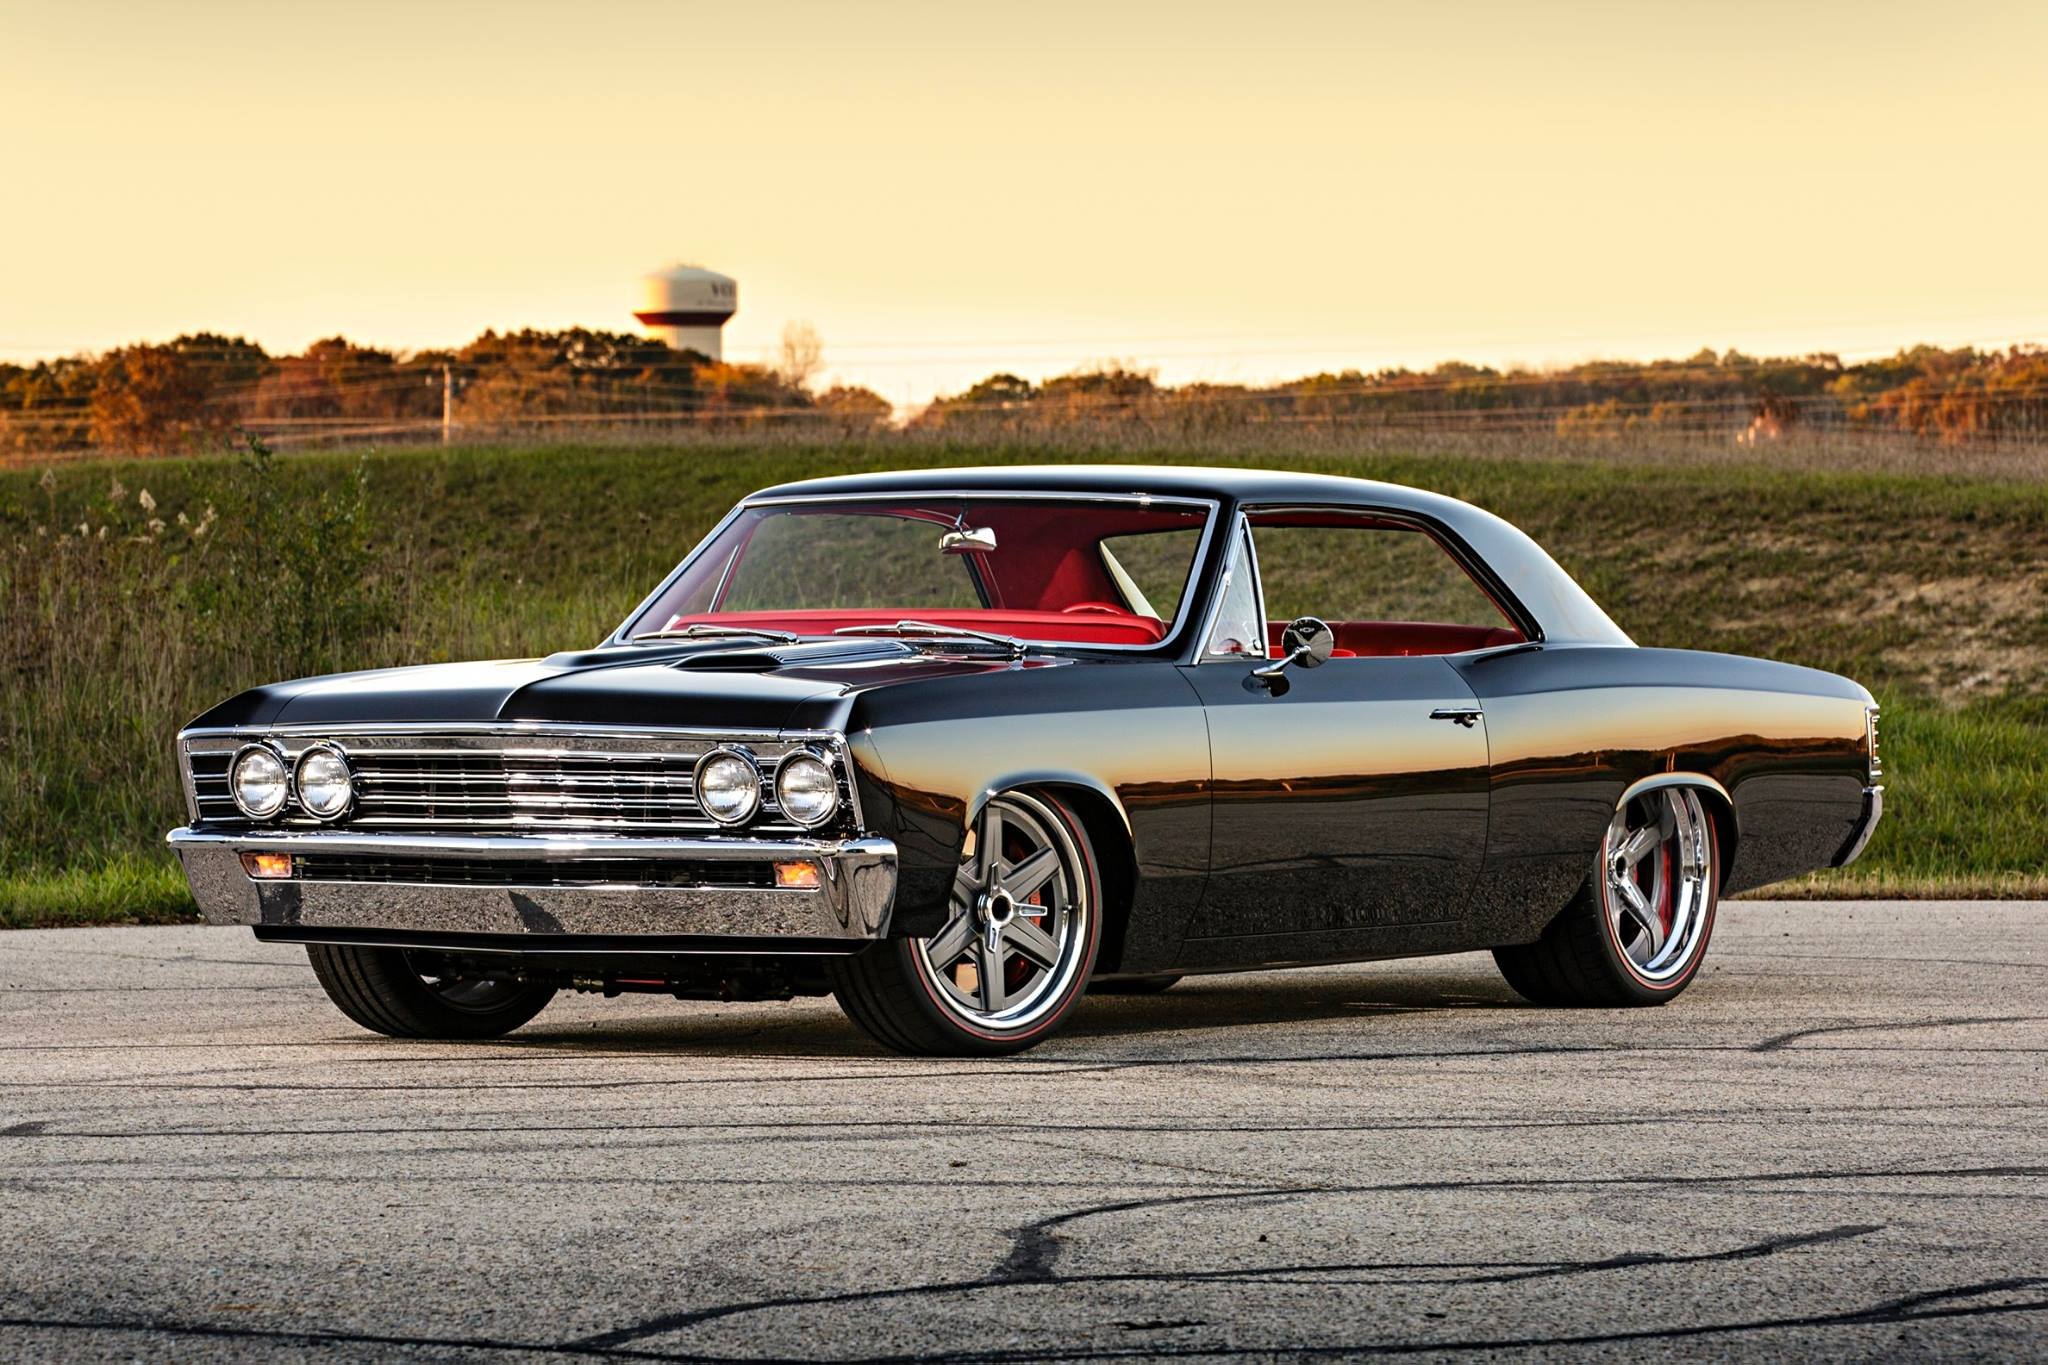 Chrome Billet Grille on Black Chevy Chevelle - Photo by Forgeline Motorsports